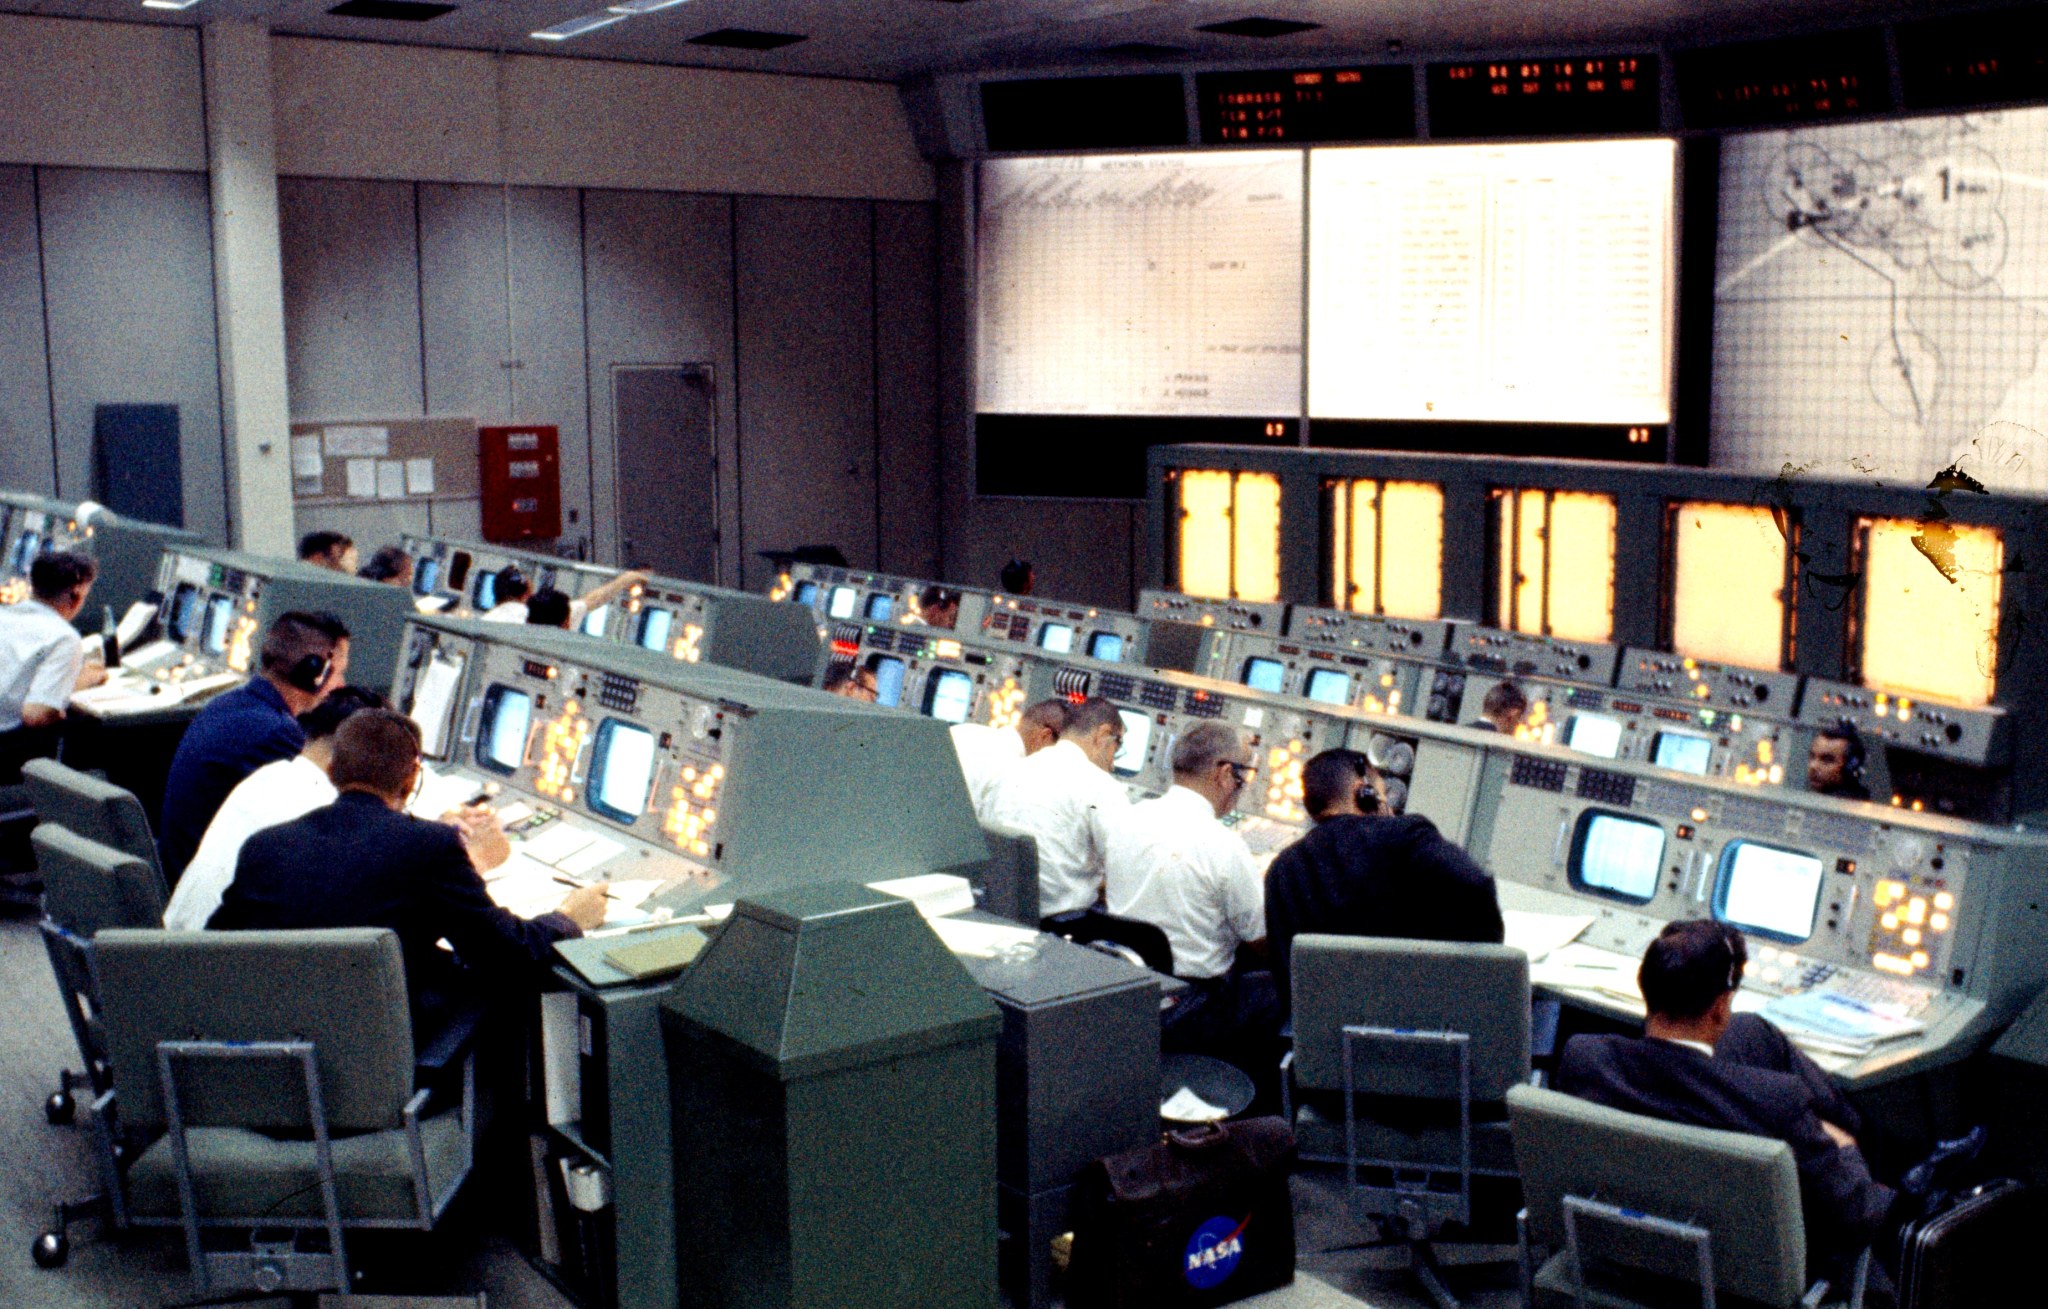 An overall view of Mission Control at the Manned Spacecraft Center in Houston during the early hours of the Gemini IV flight.